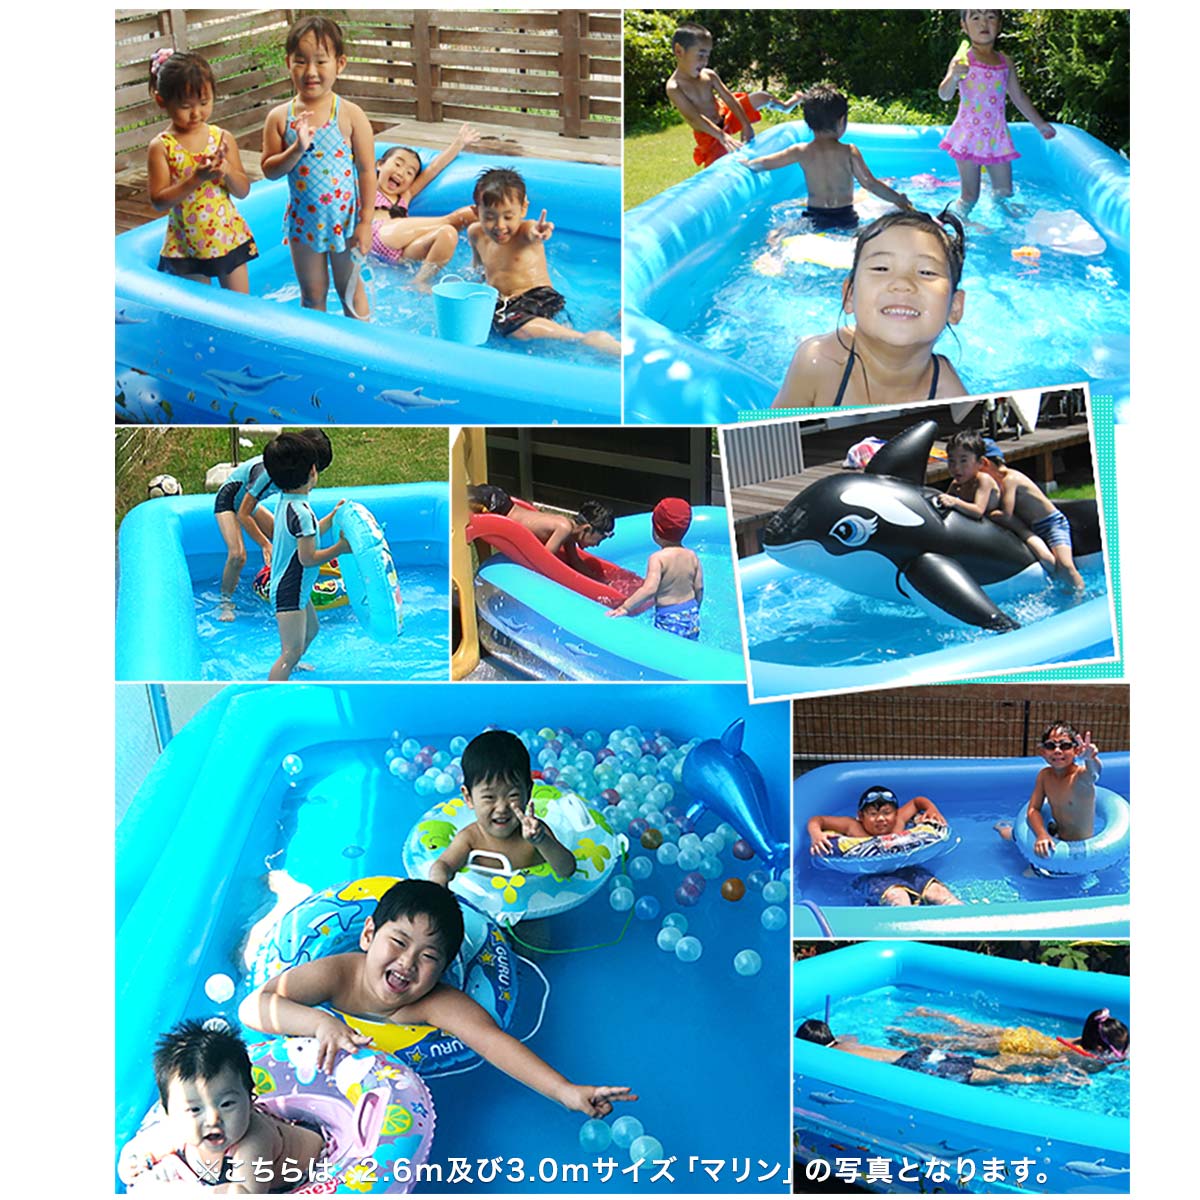 1 year guarantee pool home use pool 3m large for children Family pool popular recommendation stylish large Kids pool lovely playing in water garden veranda home child care free shipping 